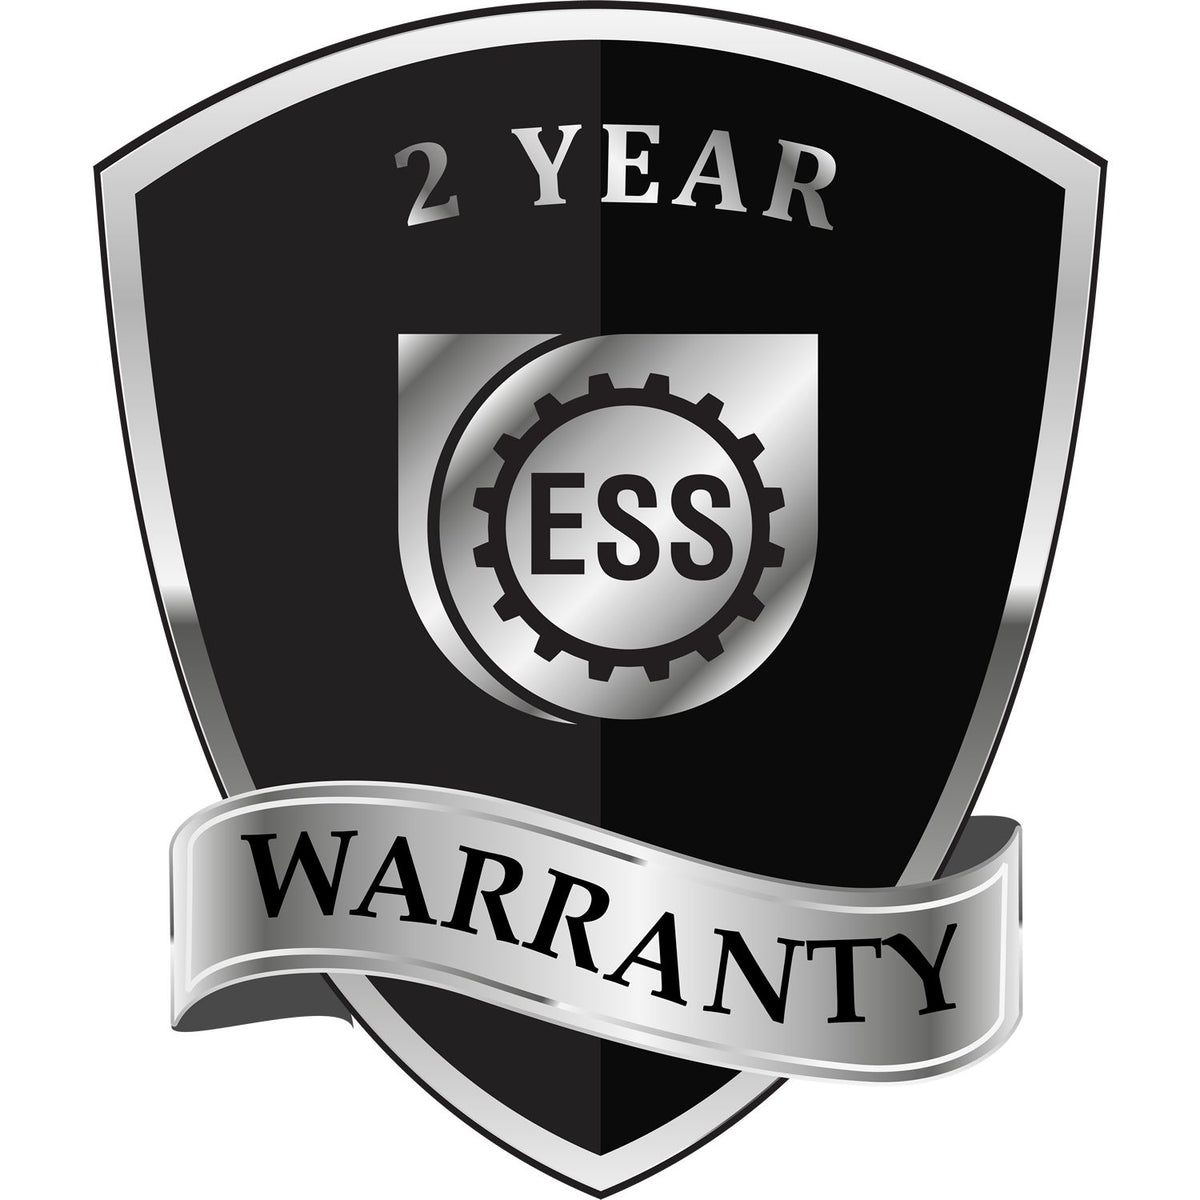 A badge or emblem showing a warranty icon for the Heavy Duty Cast Iron Pennsylvania Engineer Seal Embosser